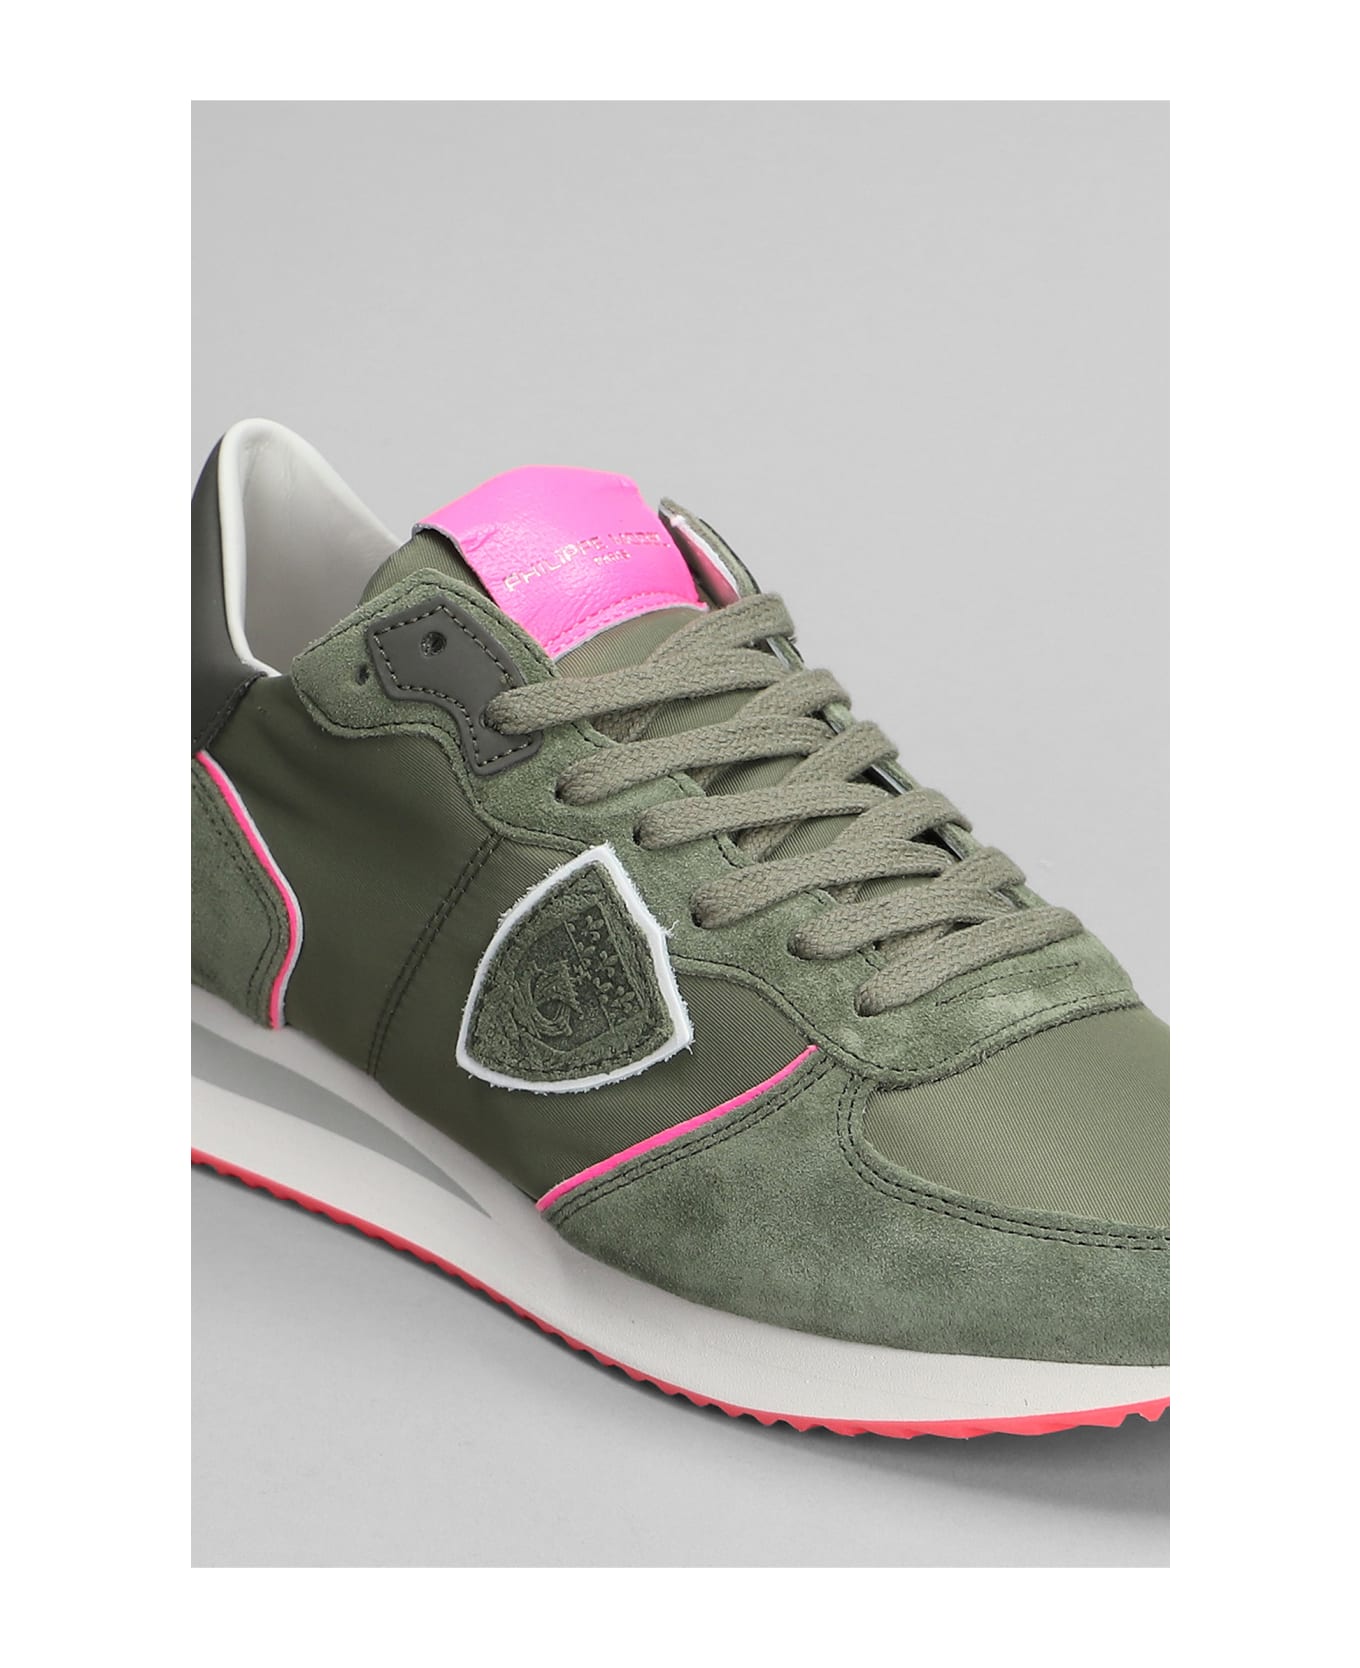 Philippe Model Trpx Low Sneakers In Green Suede And Fabric - green